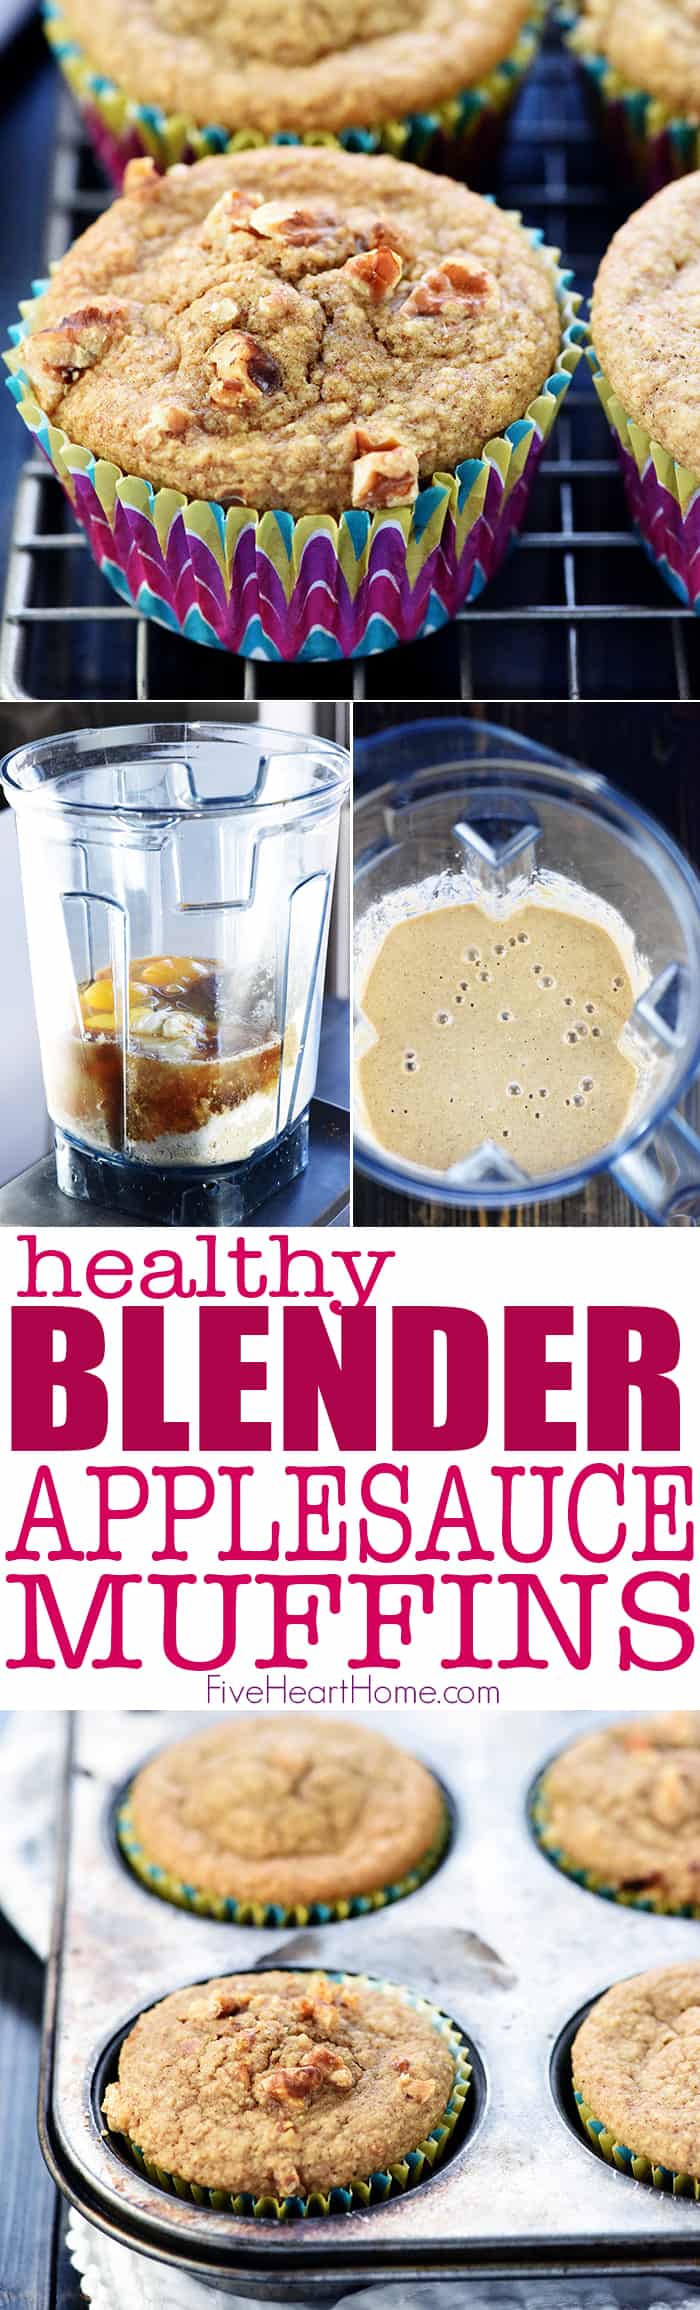 Healthy Blender Applesauce Muffins ~ loaded with wholesome ingredients for a quick, yummy breakfast or snack that's as easy as blend, pour, and bake! | FiveHeartHome.com via @fivehearthome